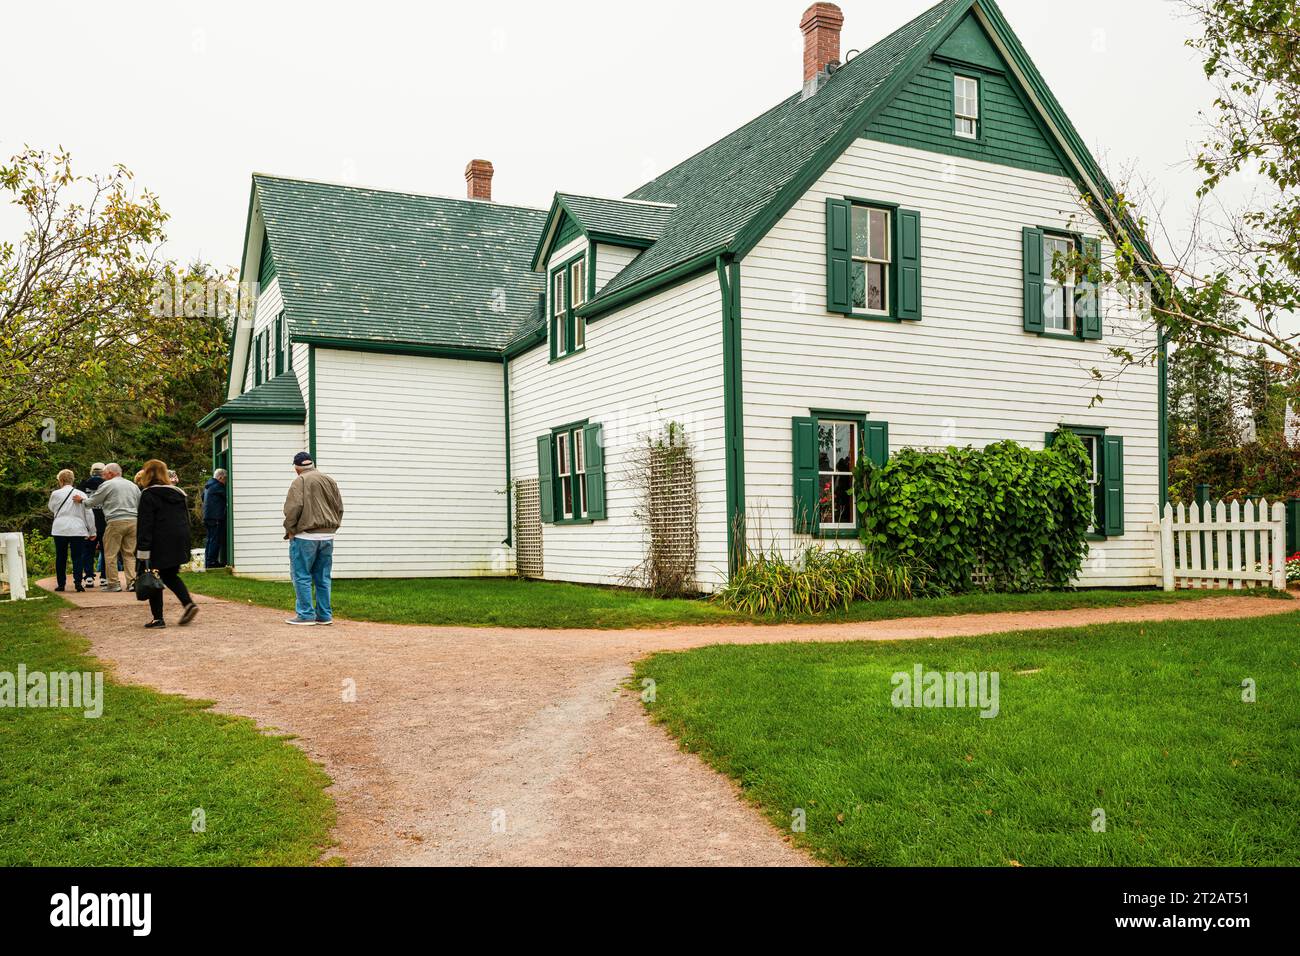 Green Gables Green Gables Heritage Place _ Cavendish, Prince Edward Island, CAN Foto Stock